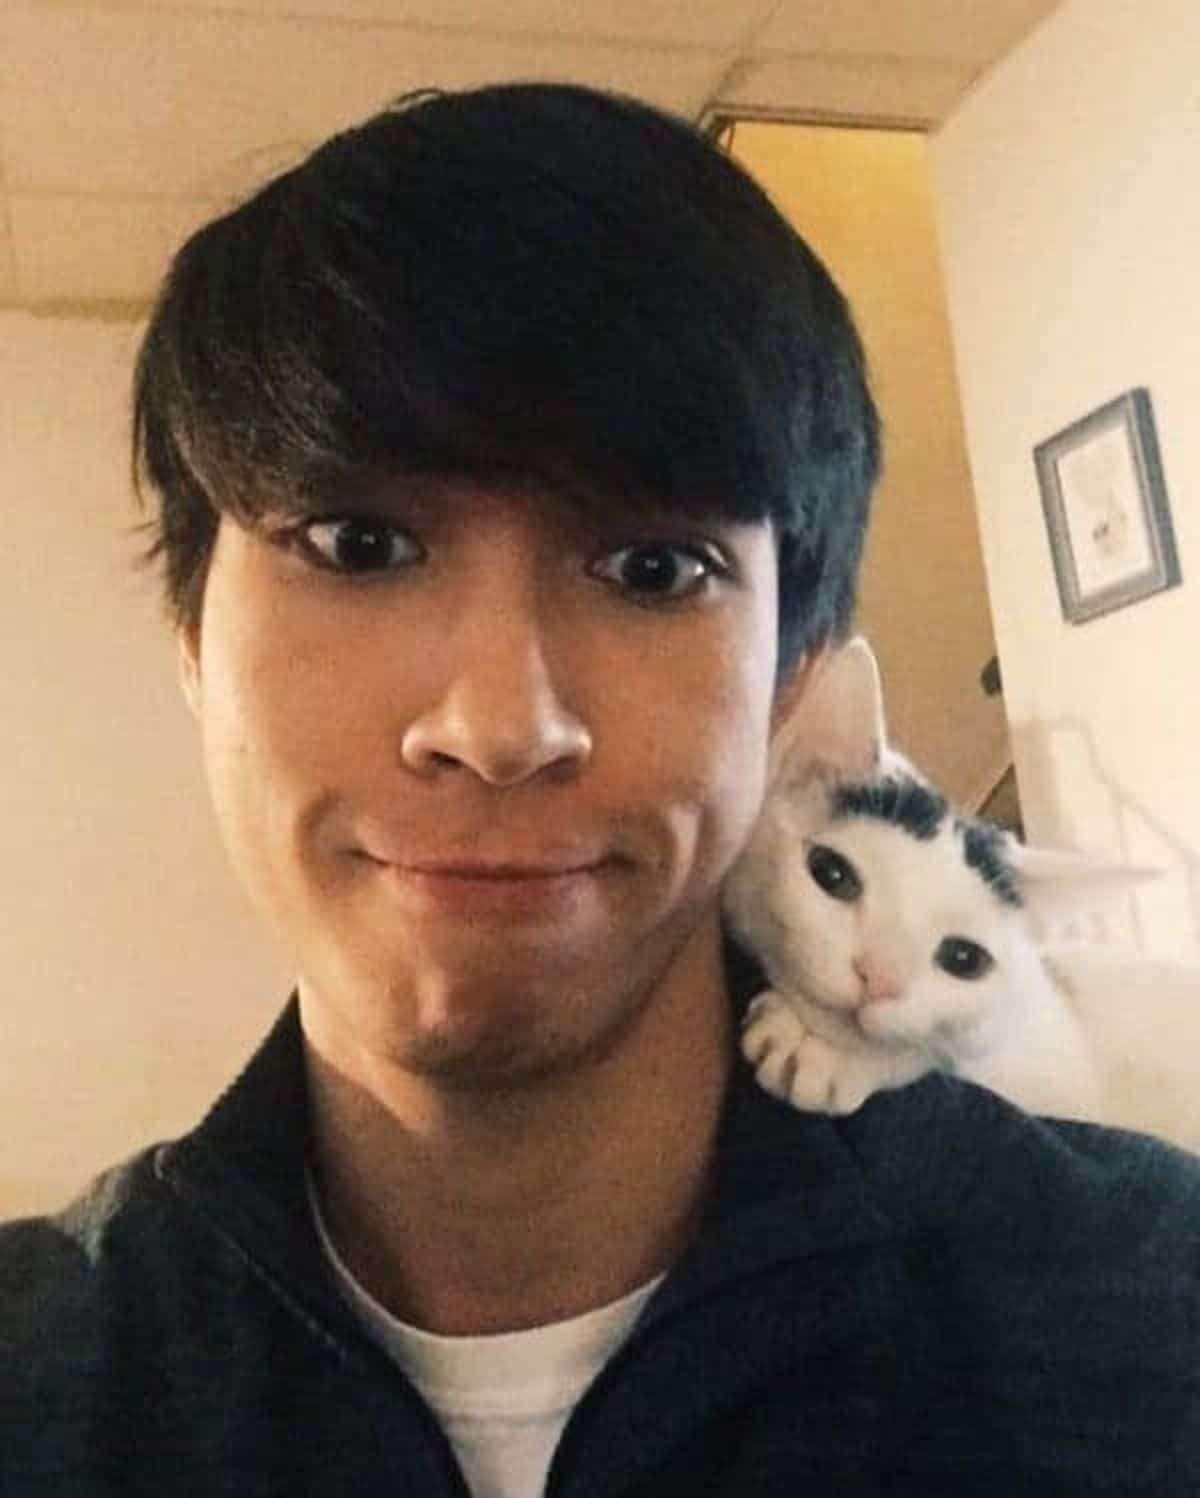 black and white kitten peeking from behind a man